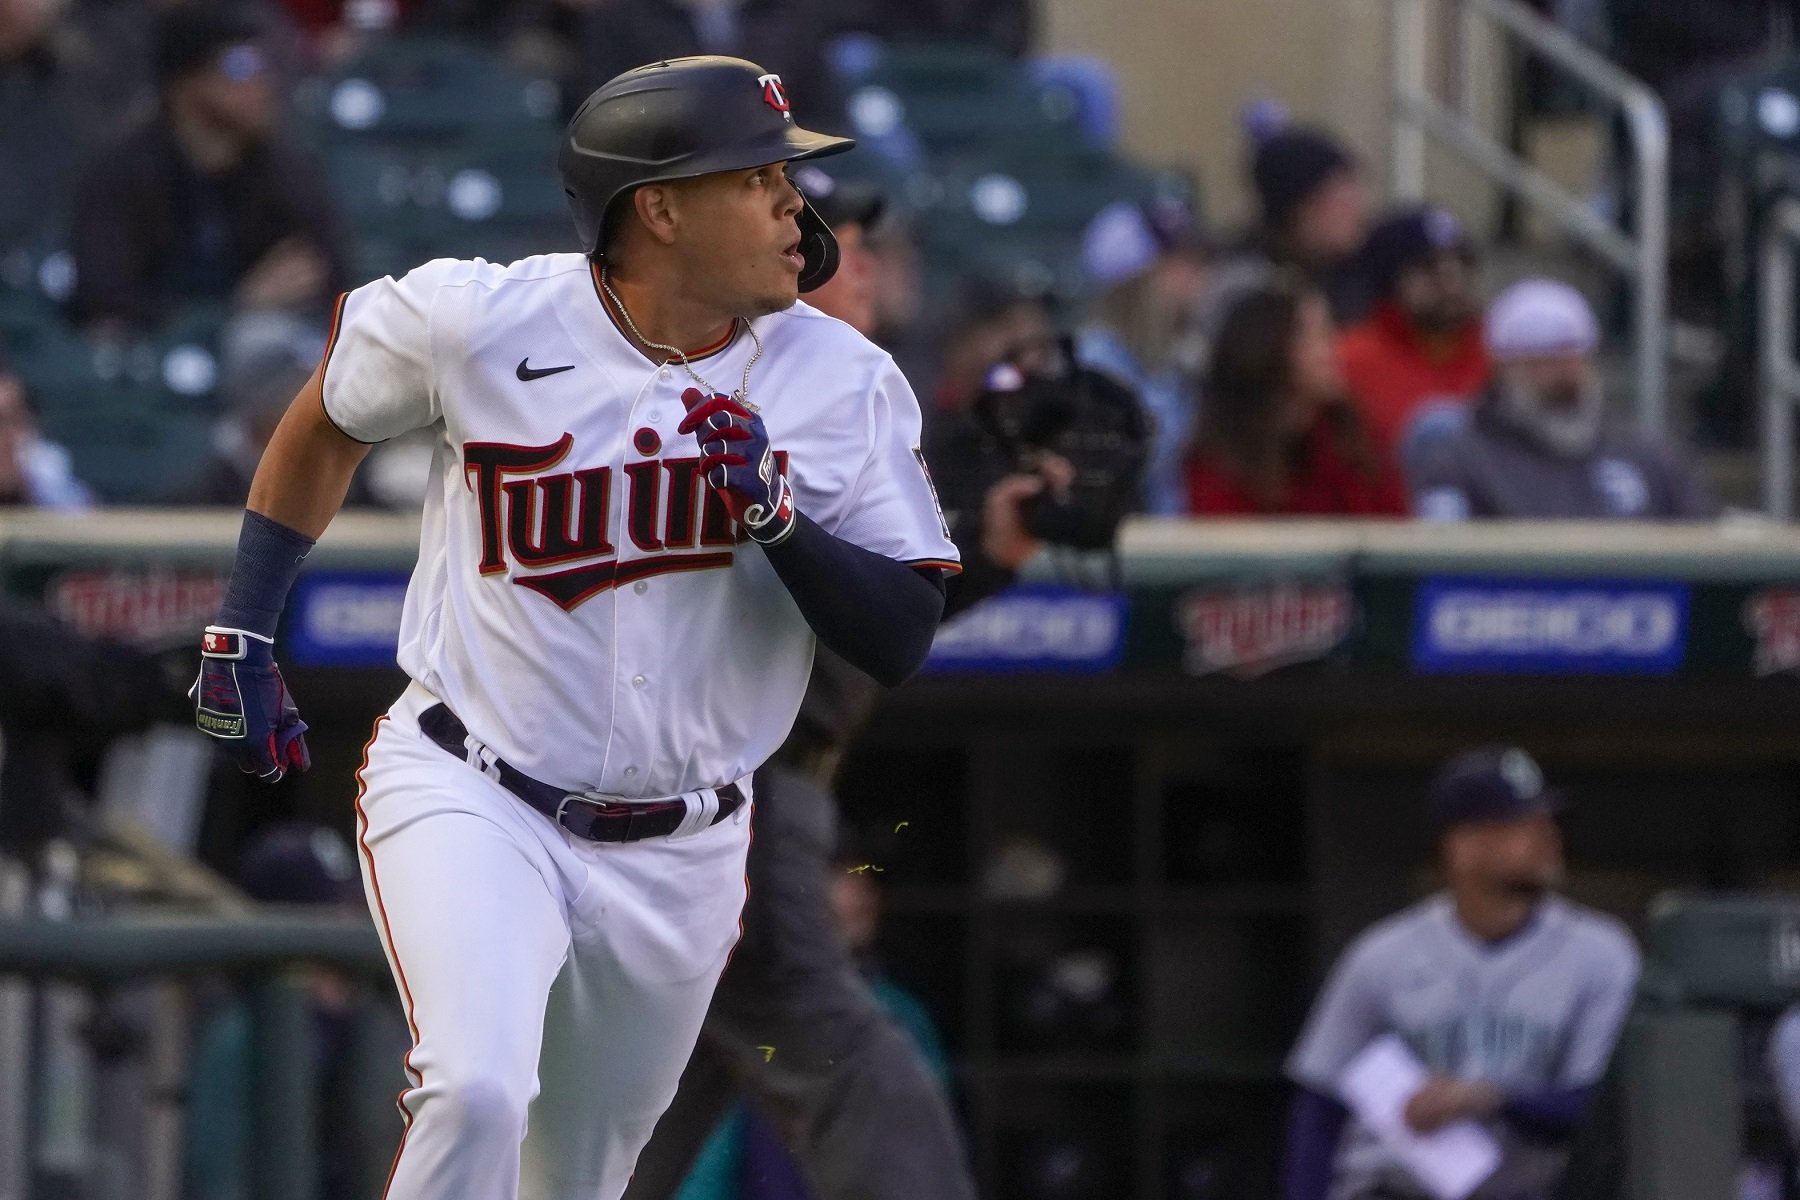 Urshela Ushers in New Hope at Third Base - Twins - Twins Daily